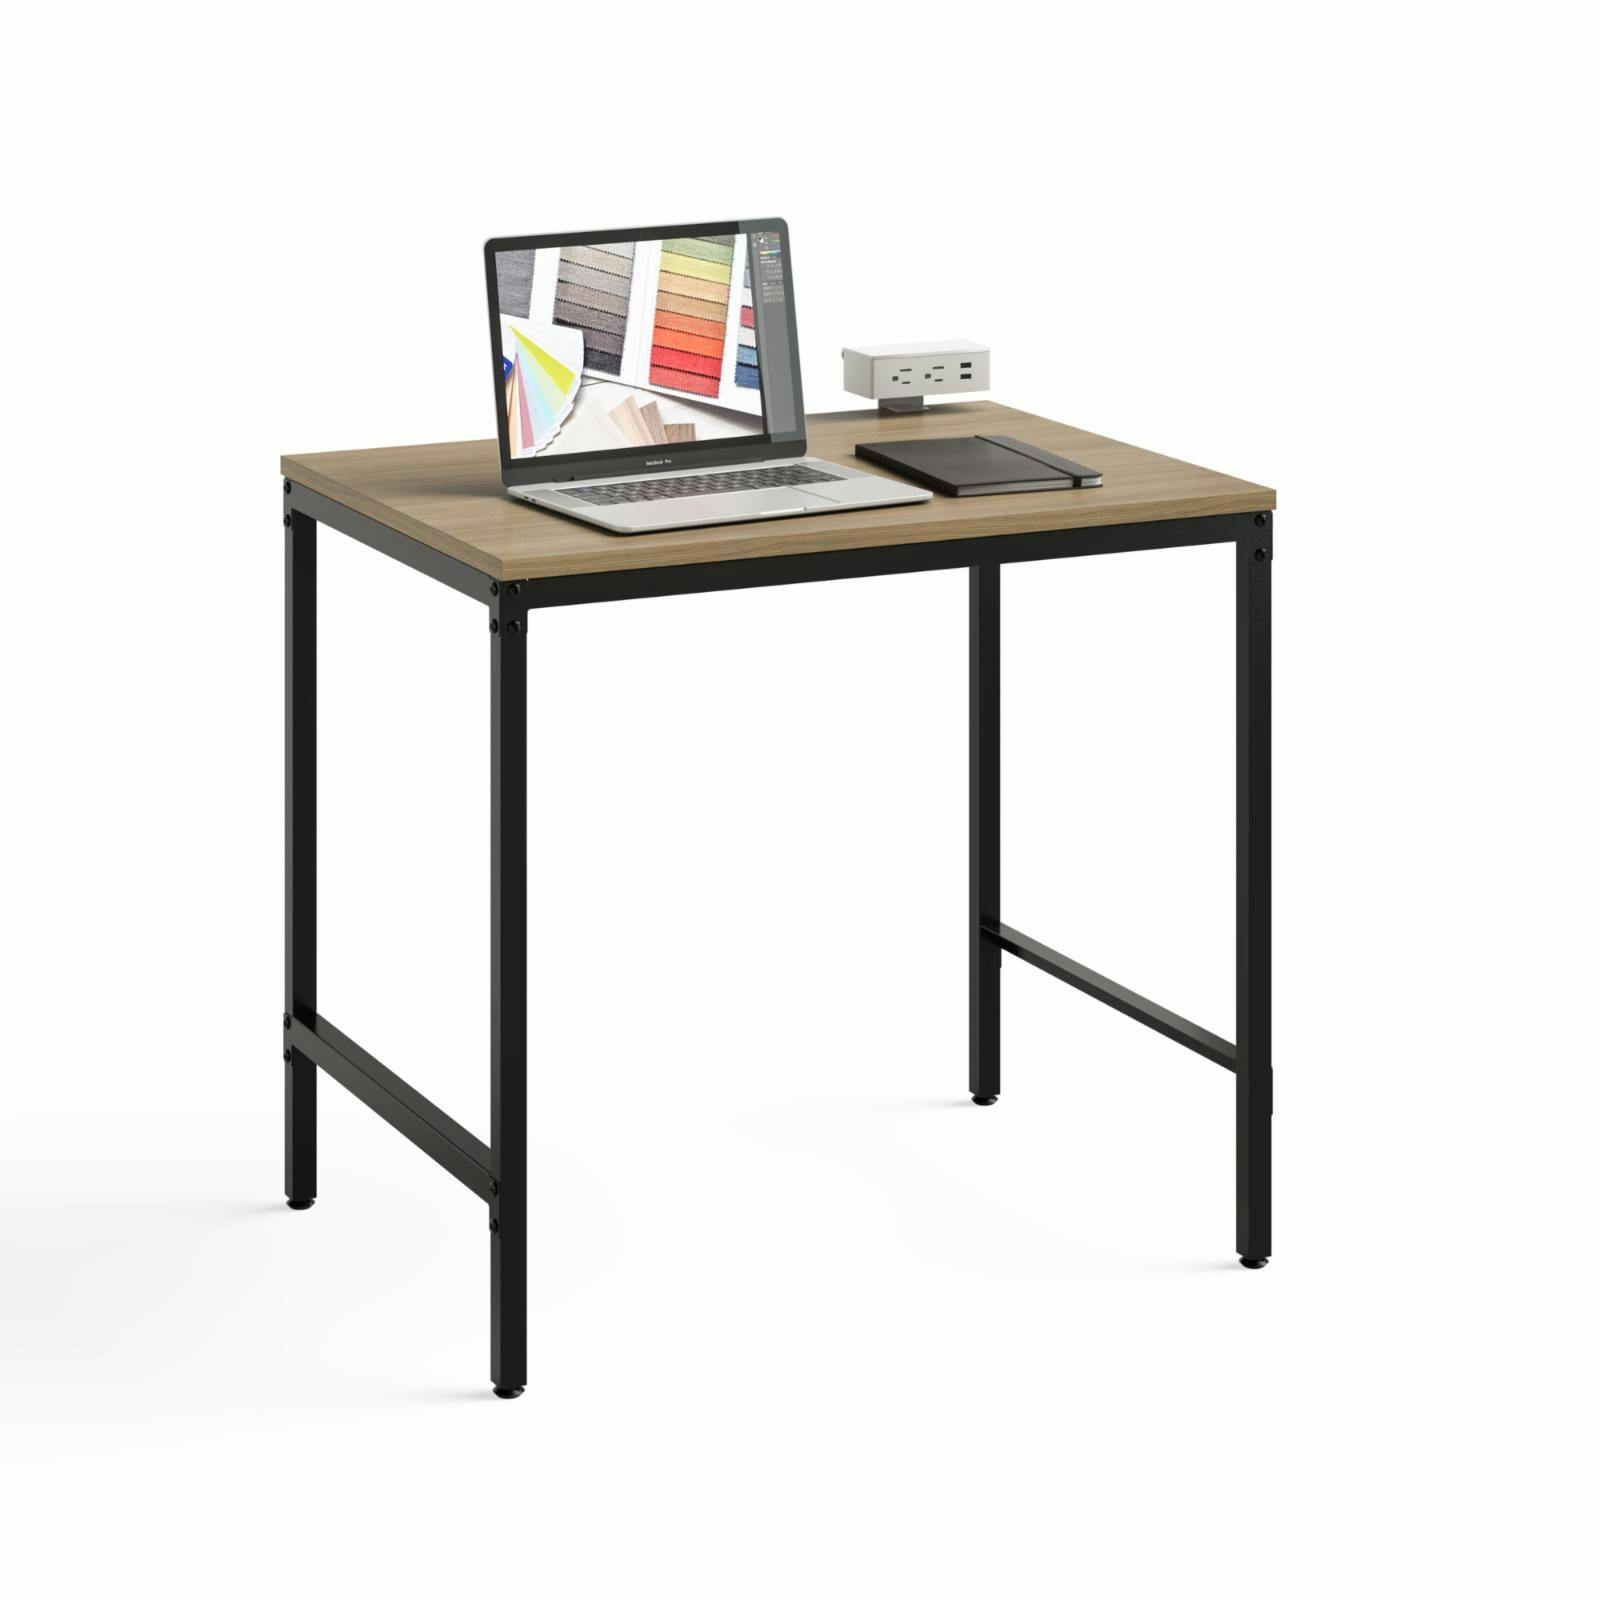 Modern Black and Walnut Study Desk with Drawer and Cable Management